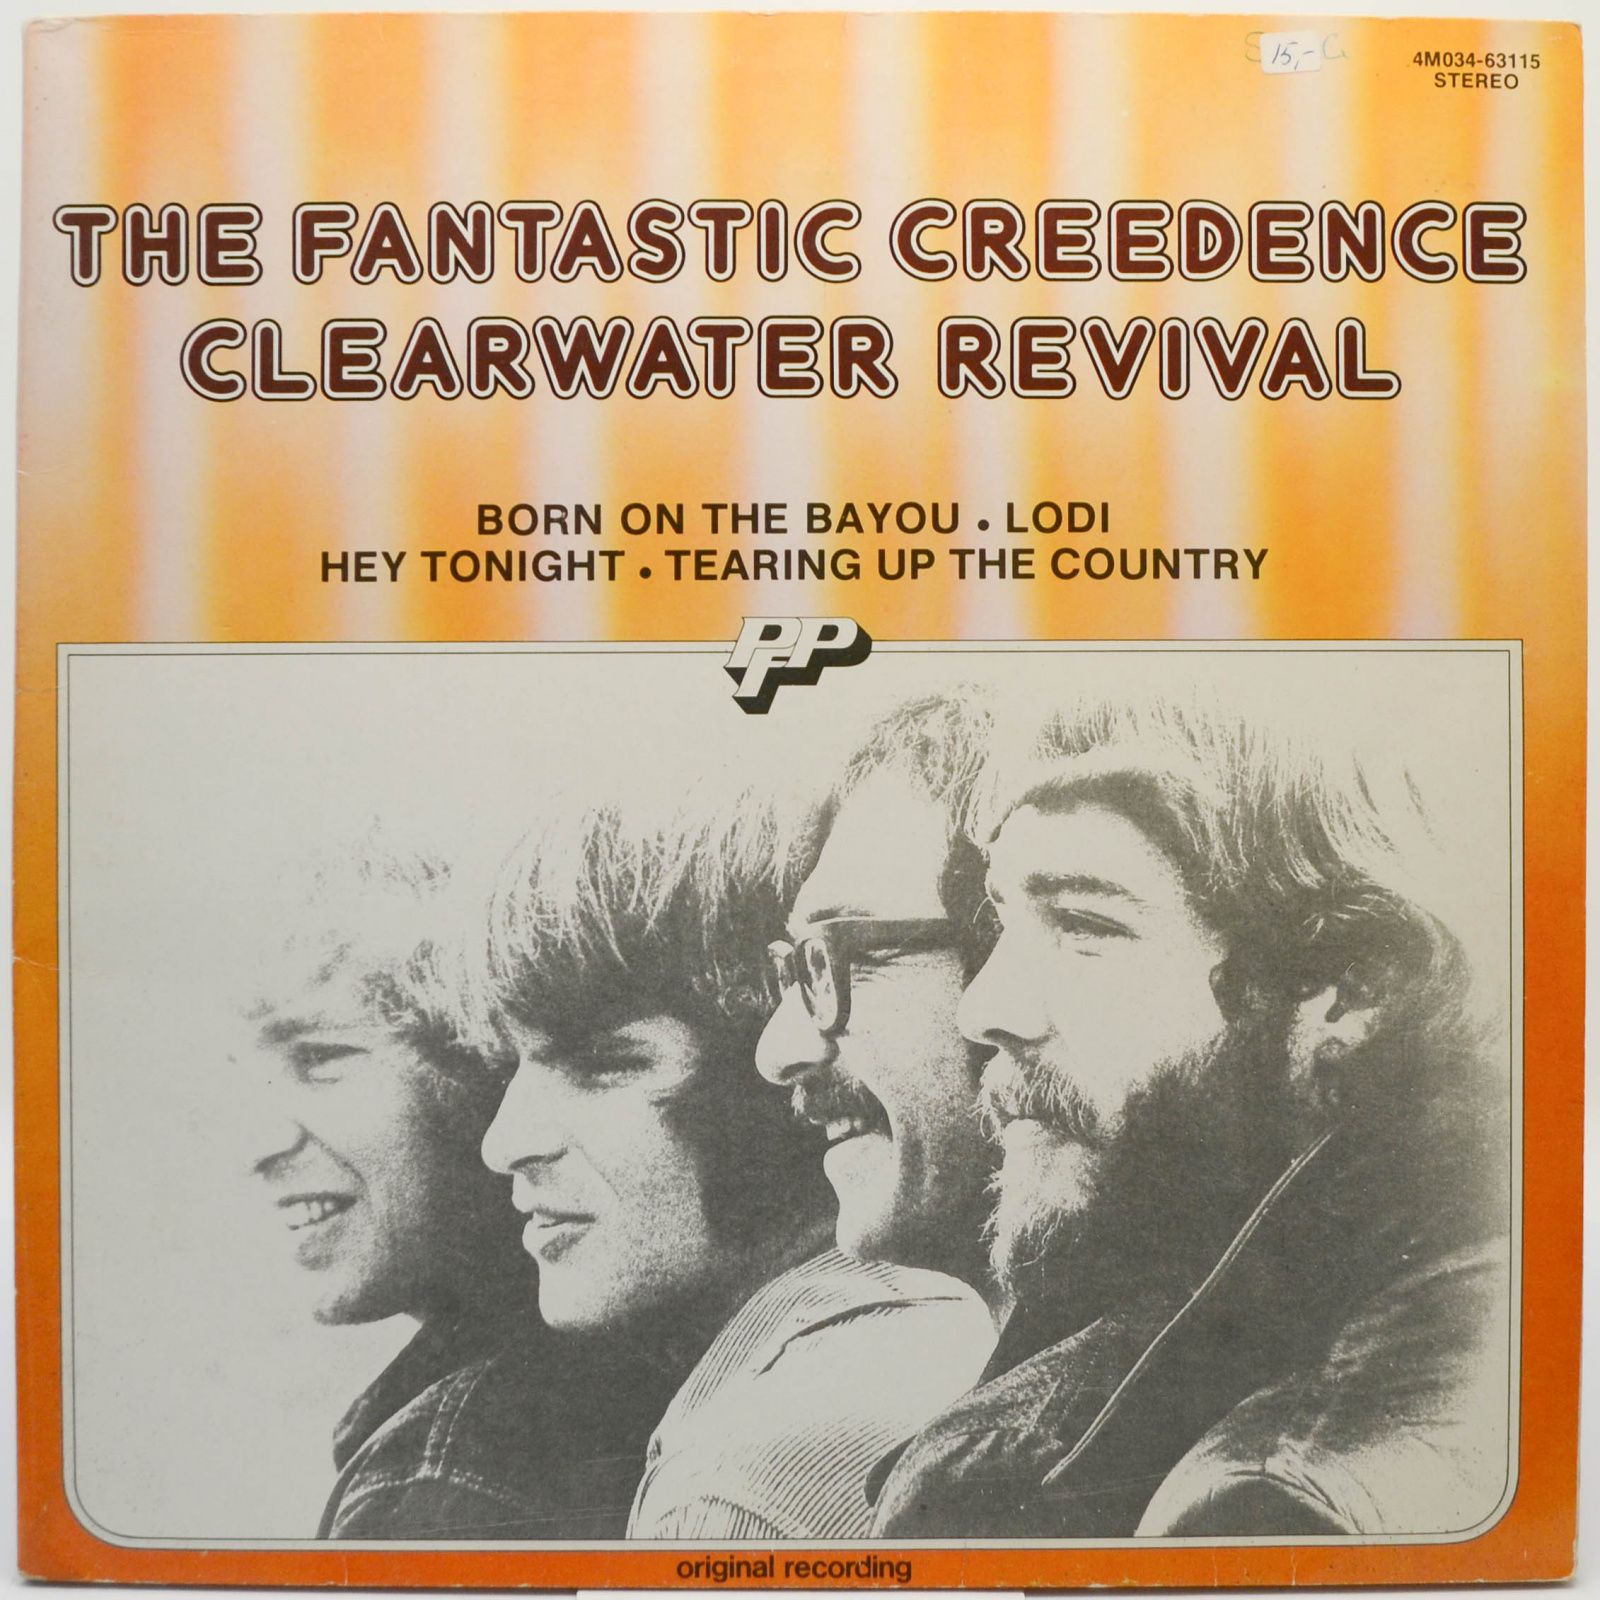 Creedence Clearwater Revival — The Fantastic Creedence Clearwater Revival, 1980